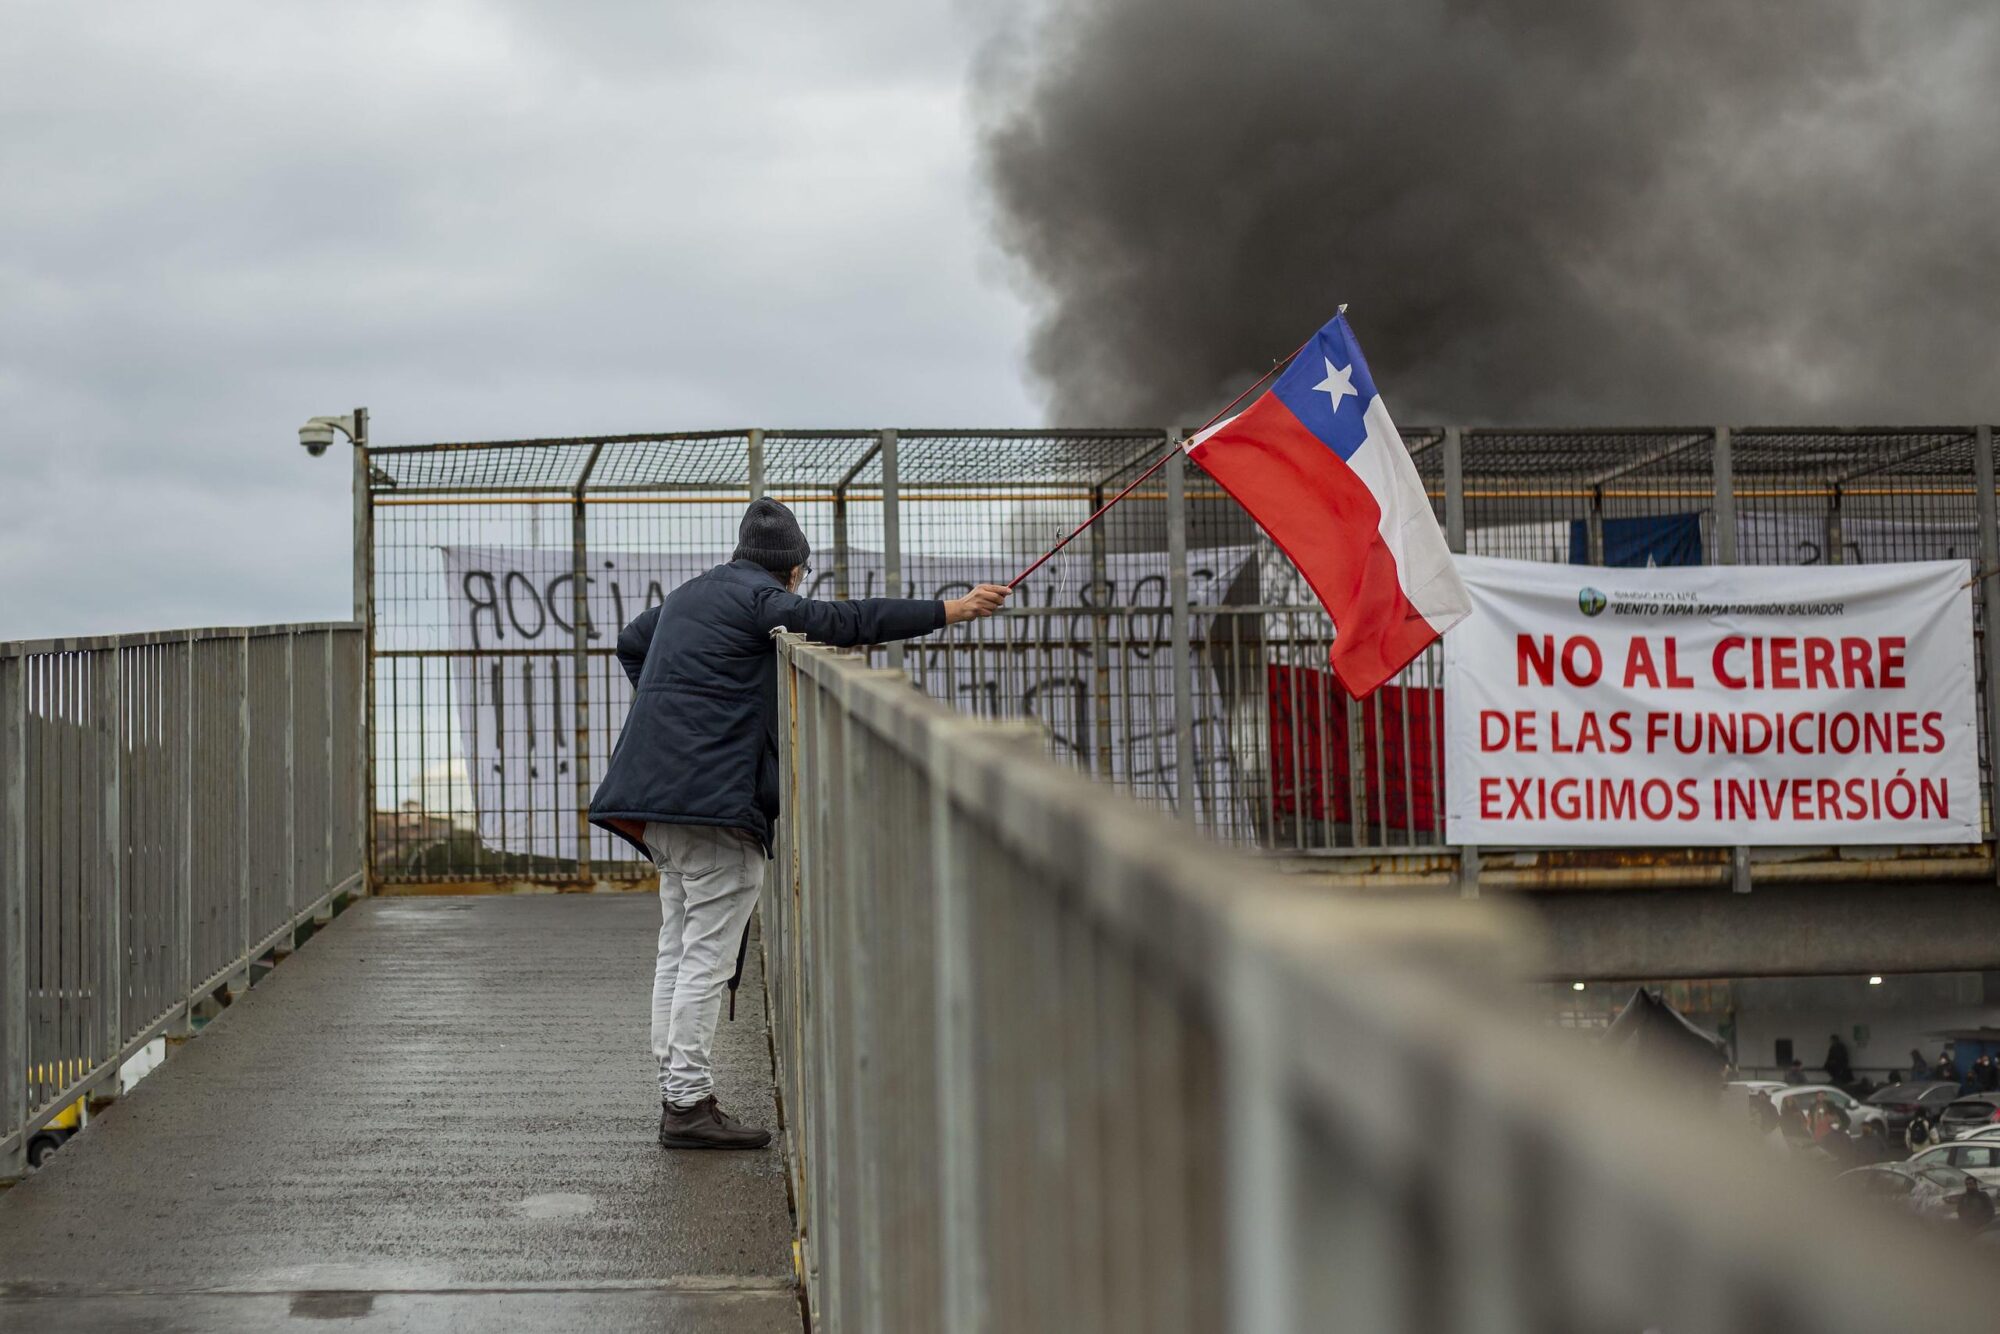 A man protesting the closure of a copper smelting plant waves the Chile flag in front of smoke, standing on a balcony